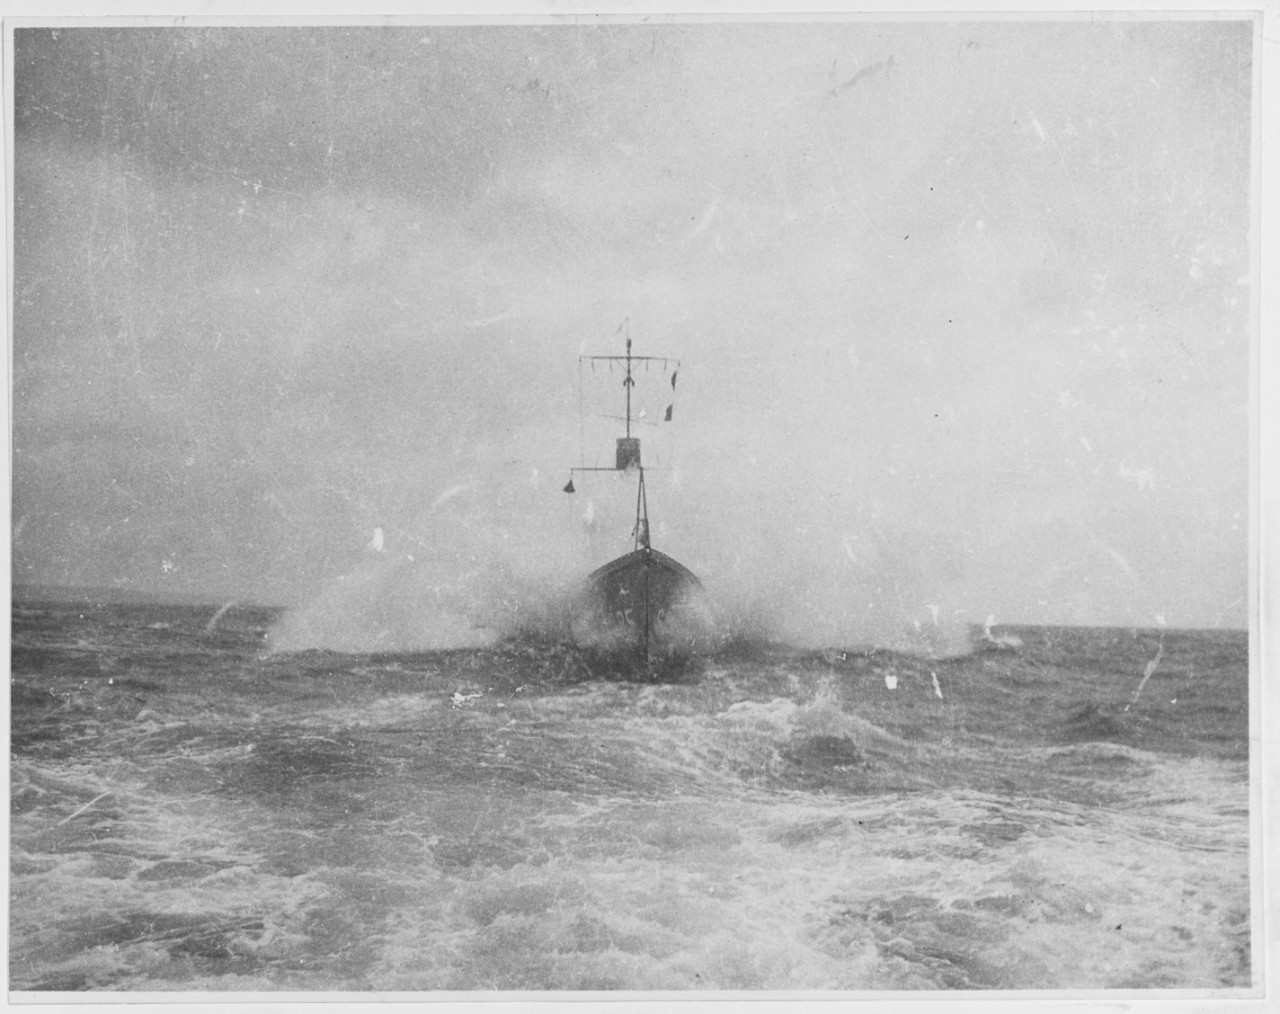 US Subchaser